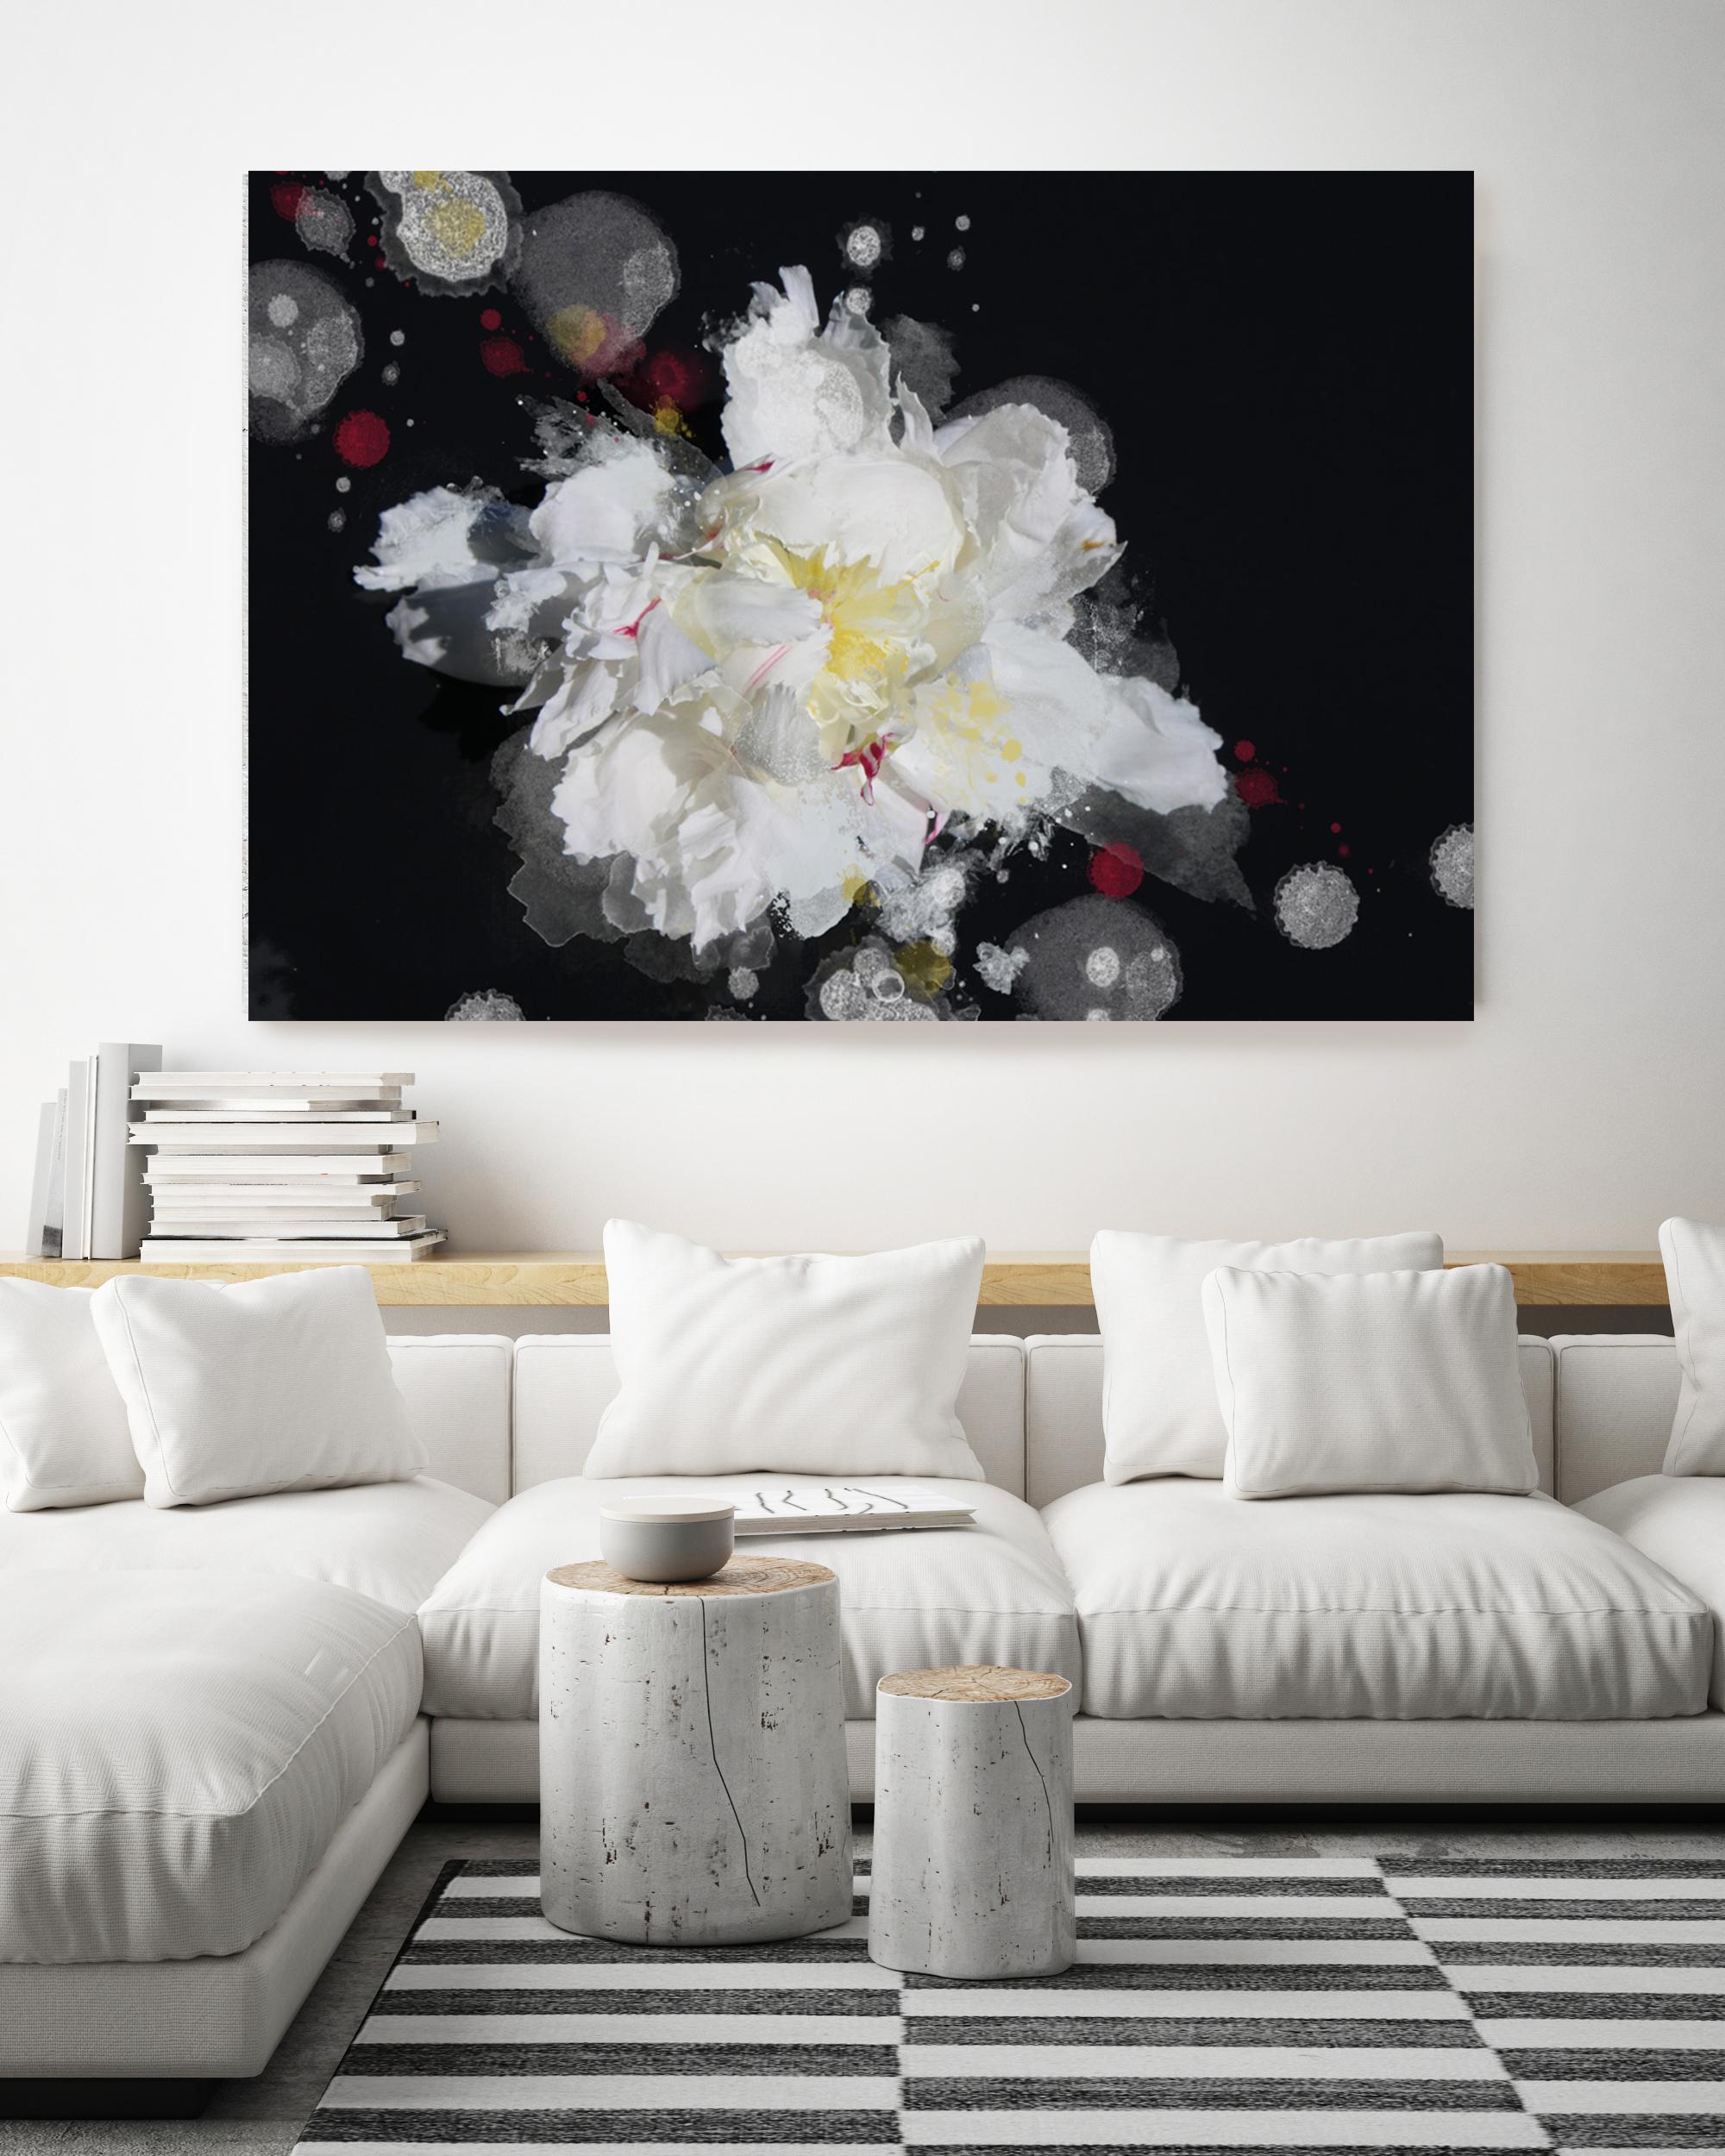   Breathless 6, Black White Floral Art Embellished Giclee on Canvas 40H X 60W - Painting by Irena Orlov